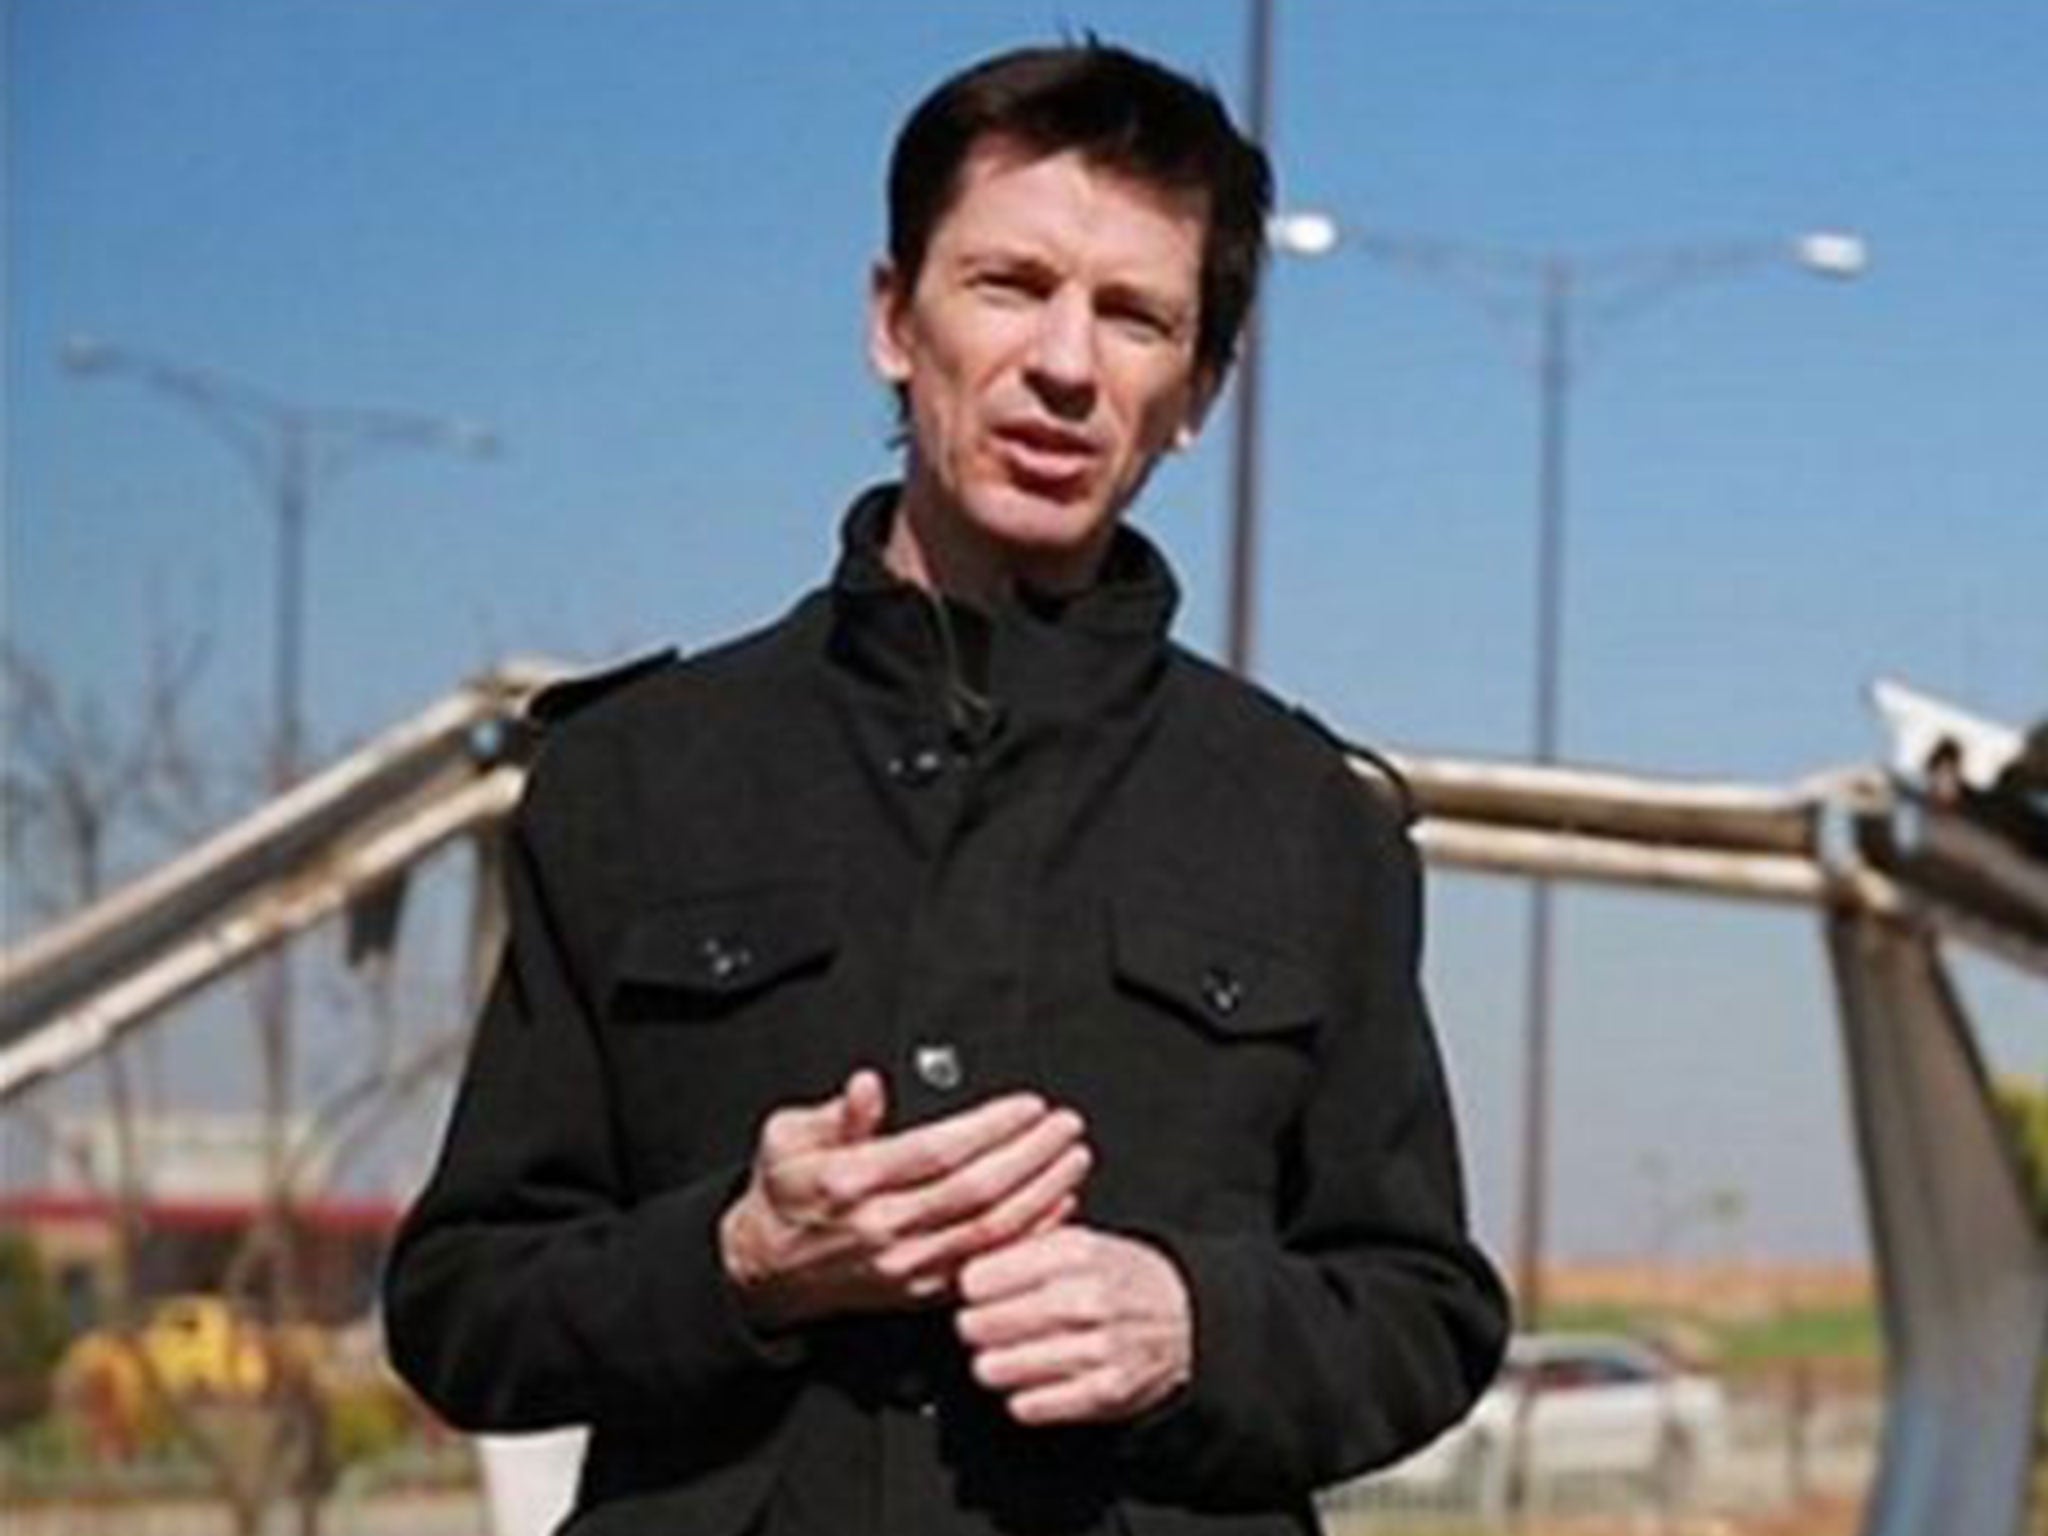 British hostage John Cantlie was shown in a series of Isis propaganda videos before disappearing during the battle of Mosul